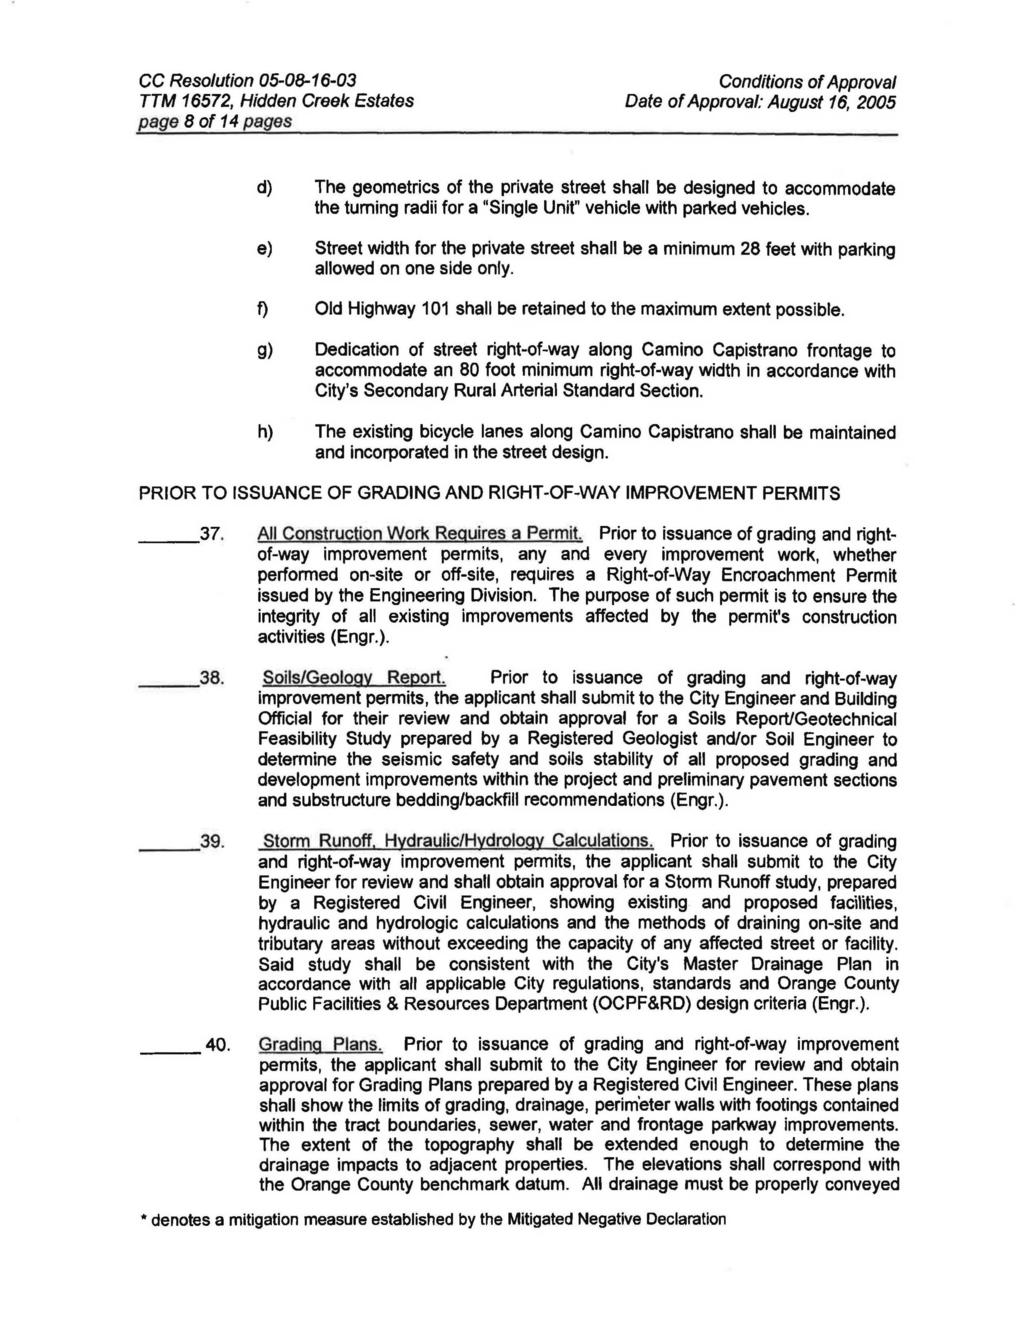 CC Resolution 05-08-16-03 TTM 16572, Hidden Creek Estates page 8 of 14 pages Conditions of Approval Date of Approval: August 16, 2005 d) The geometries of the private street shall be designed to